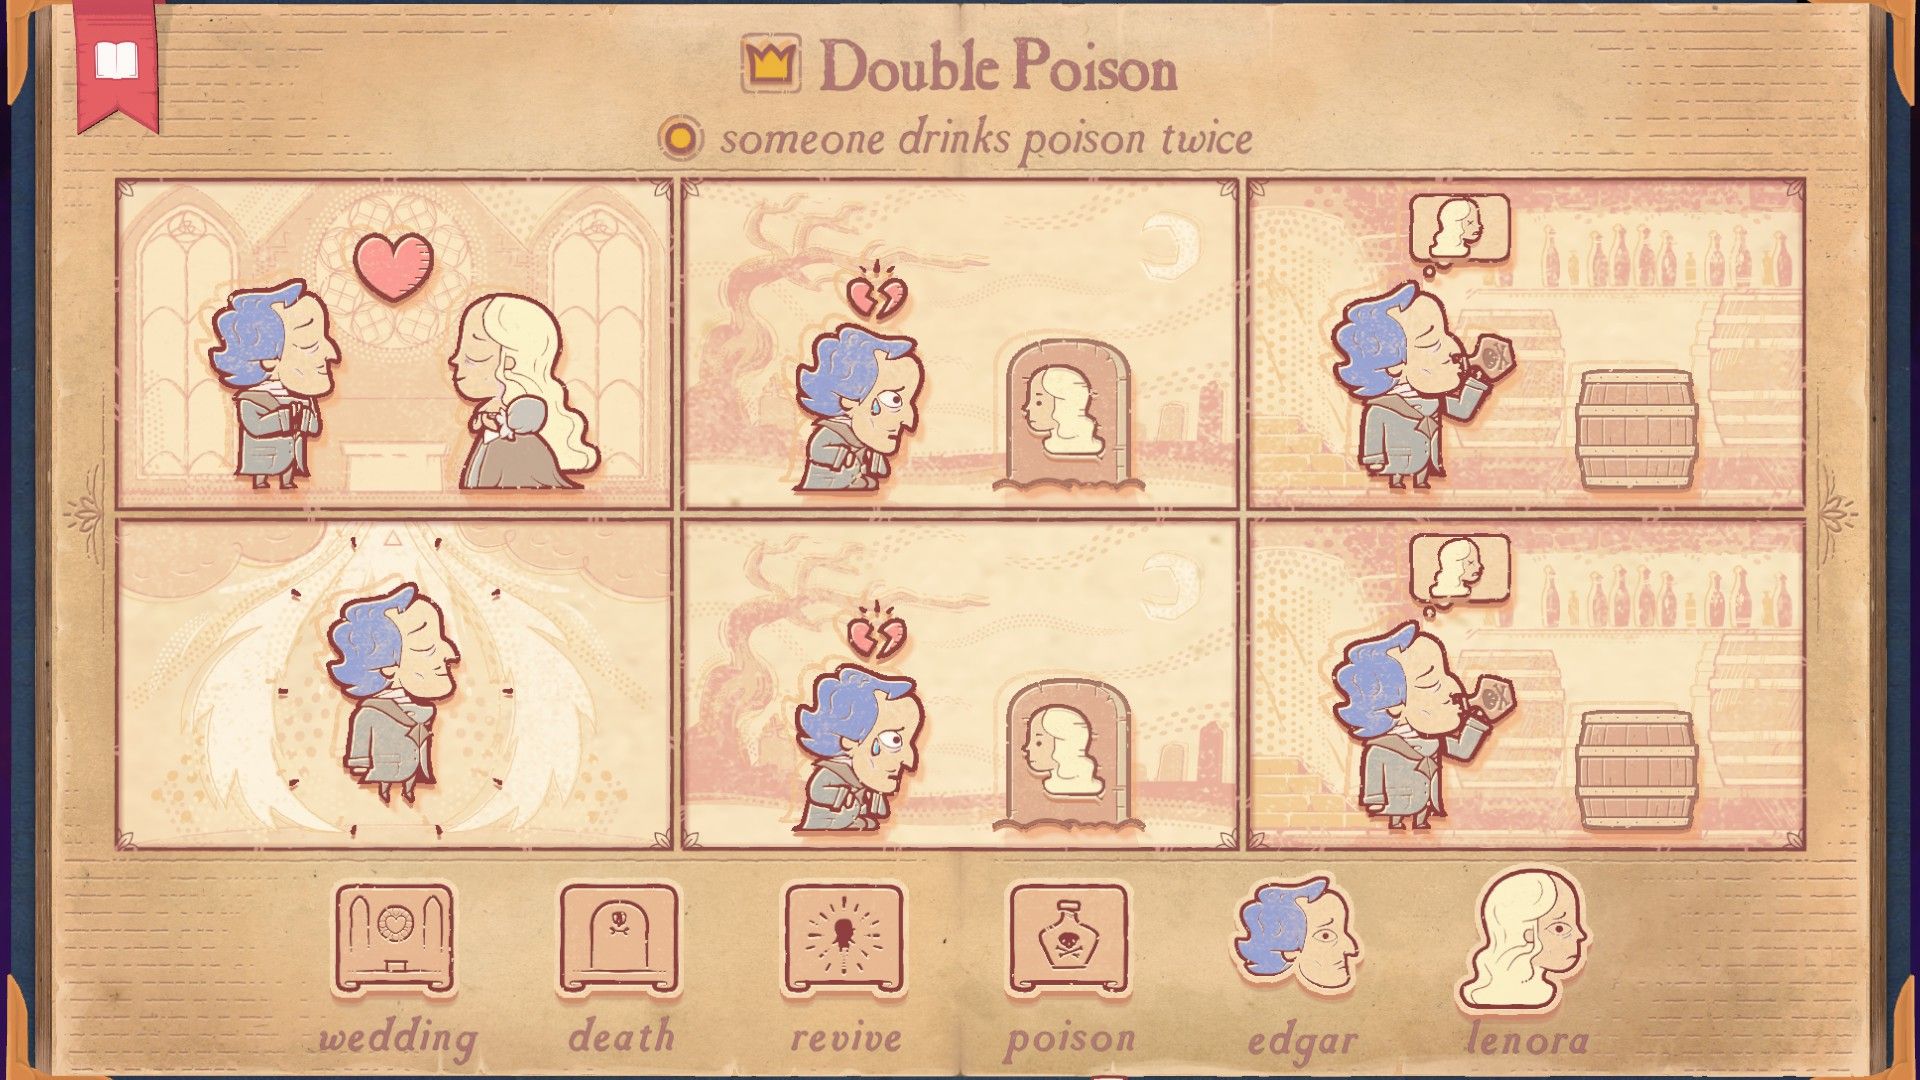 The secondary solution for the Tragedy section of Storyteller, showing the same person drinking poison twice.